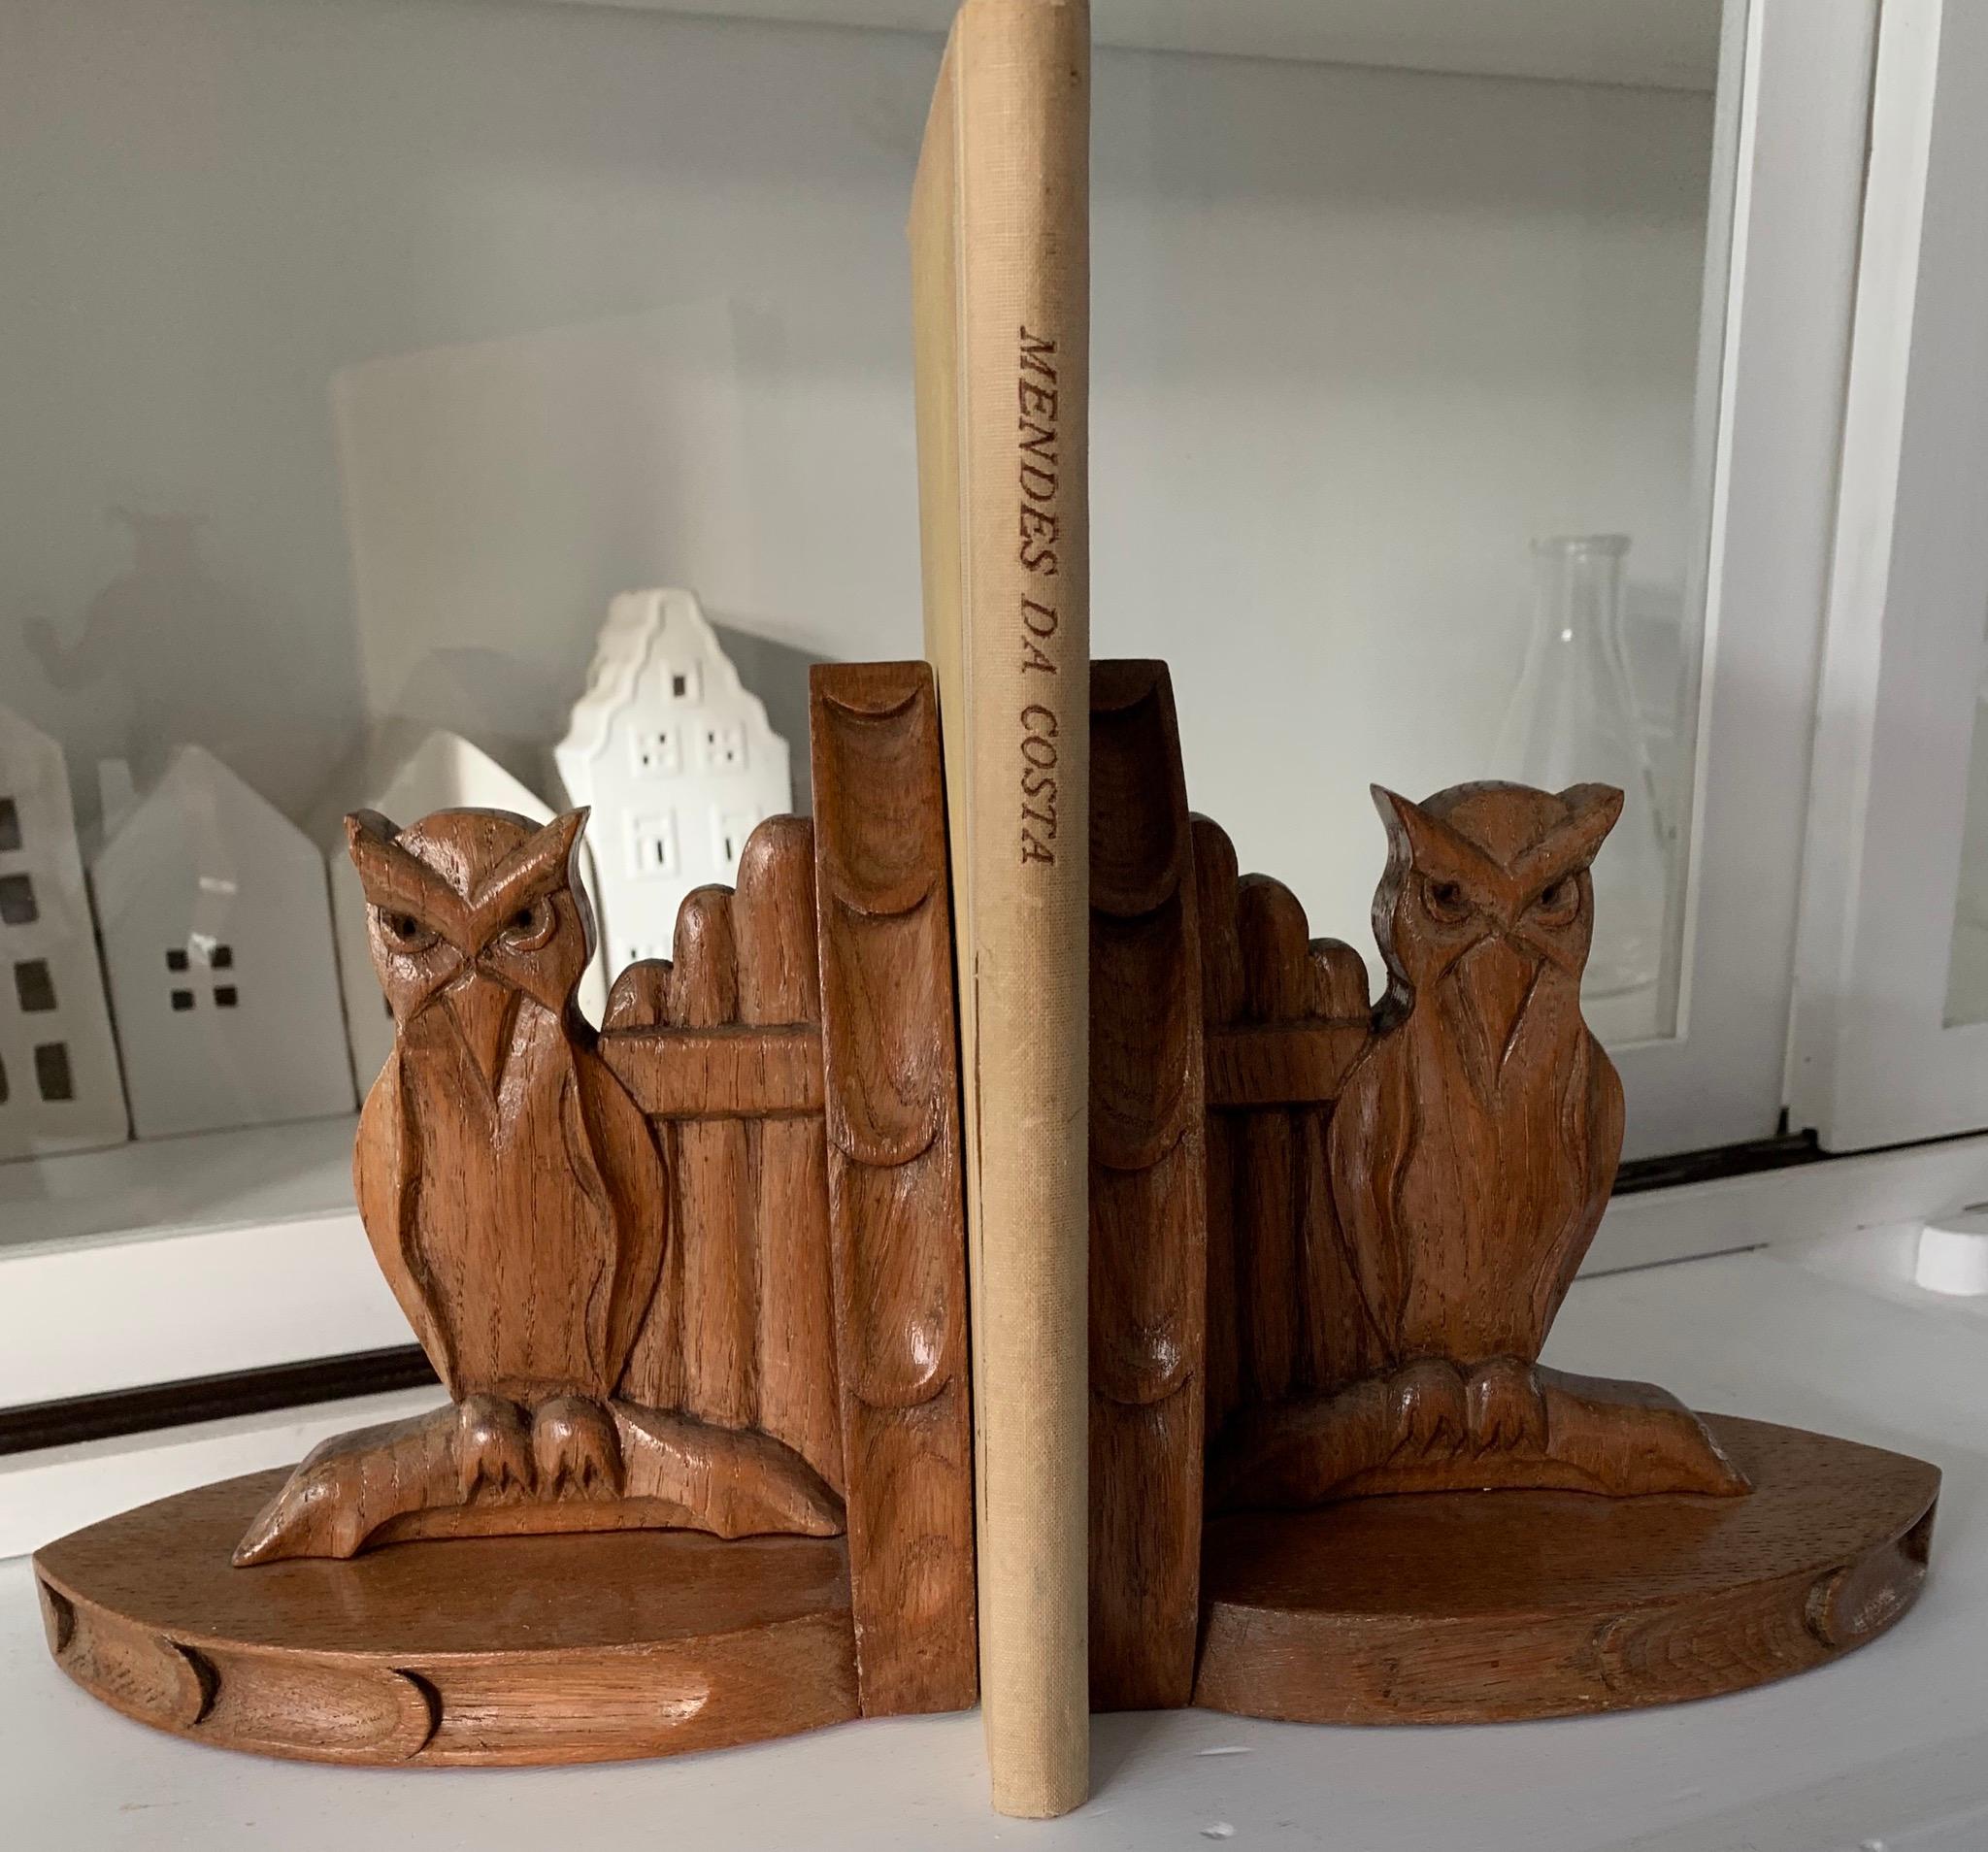 Rare and stylish standing owl sculptures book stands. 

Given the fact that owls are the international symbol for wisdom and learning, they are the perfect sculptures on a pair of bookends. These hand carved, solid oak owls are practical in size and